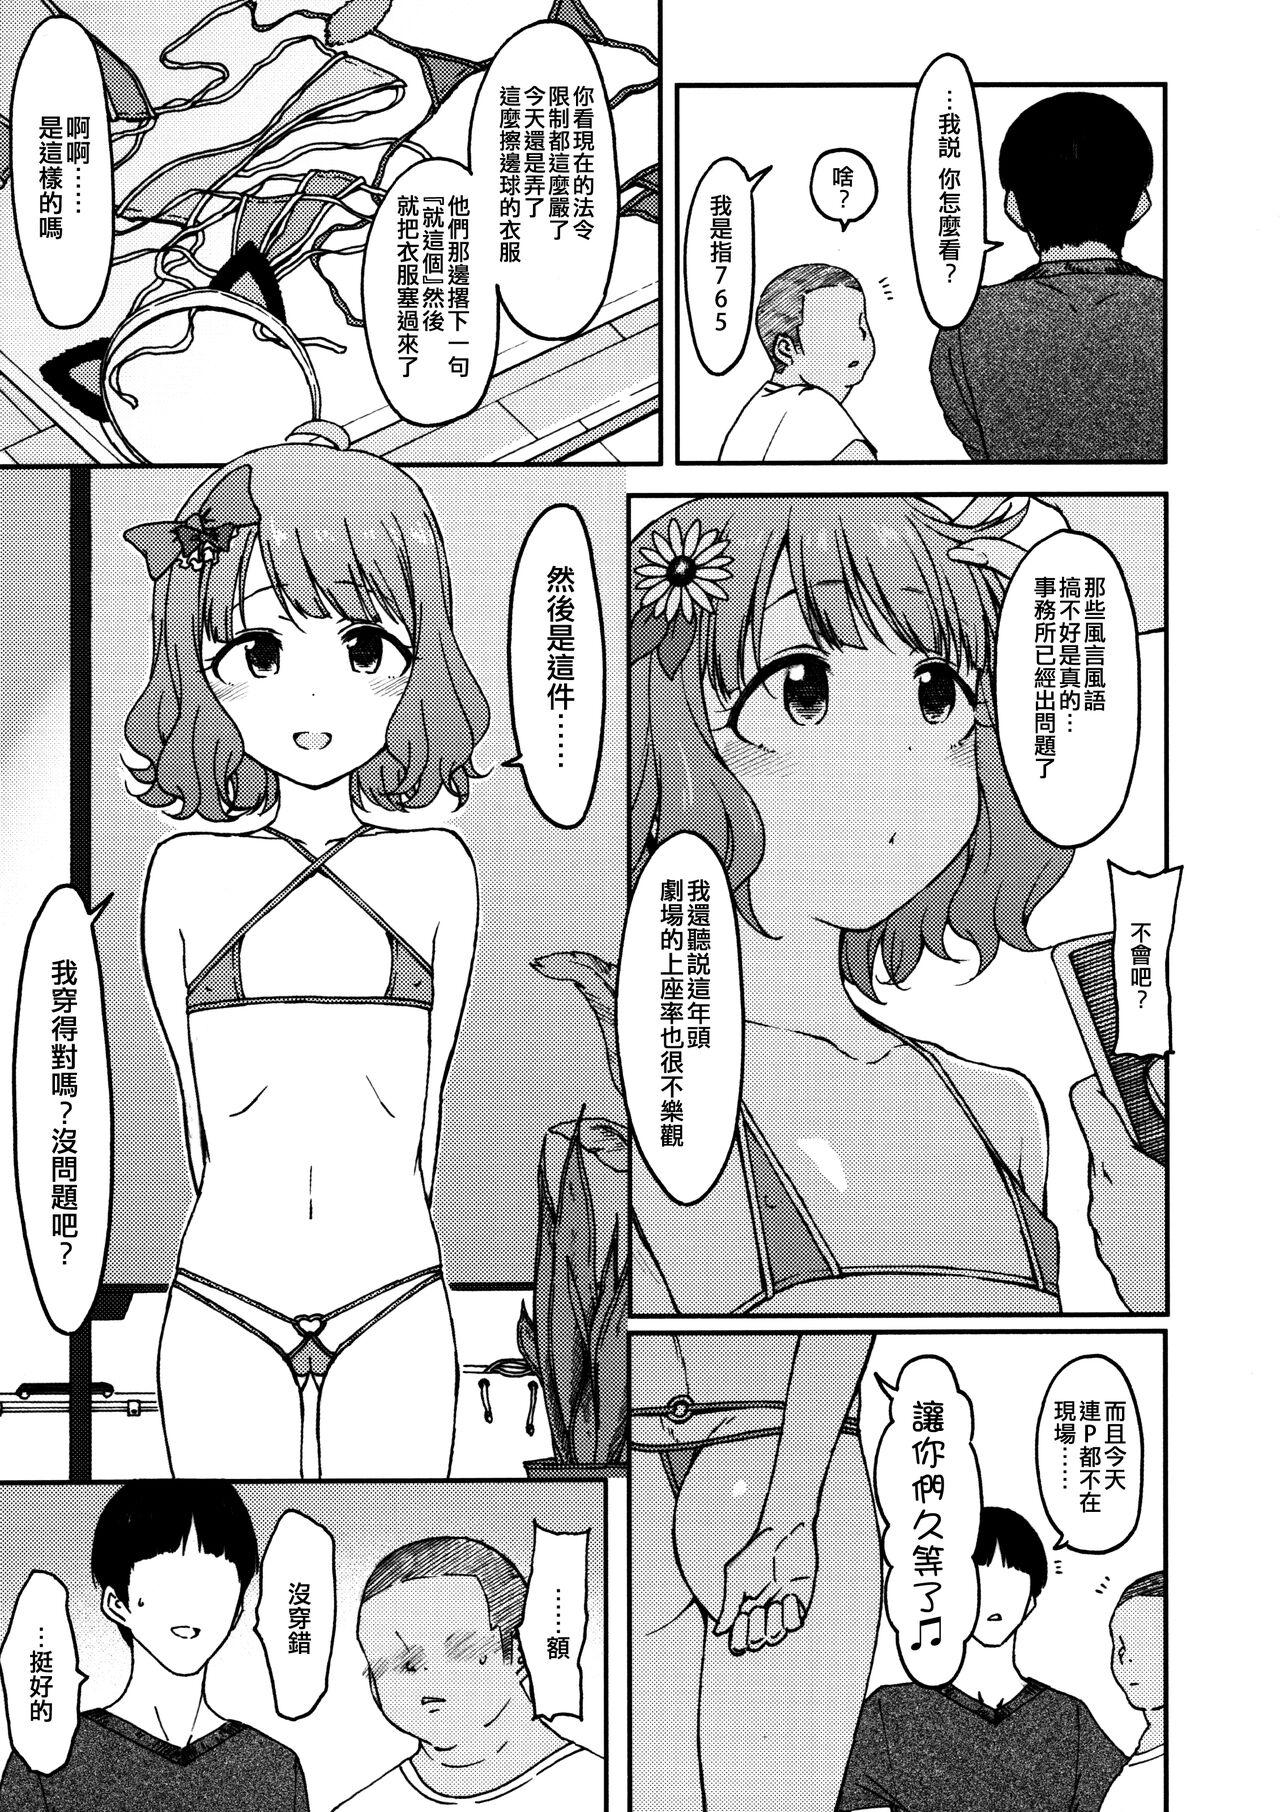 Fetish Candy Wrapper - The idolmaster Public Nudity - Page 6